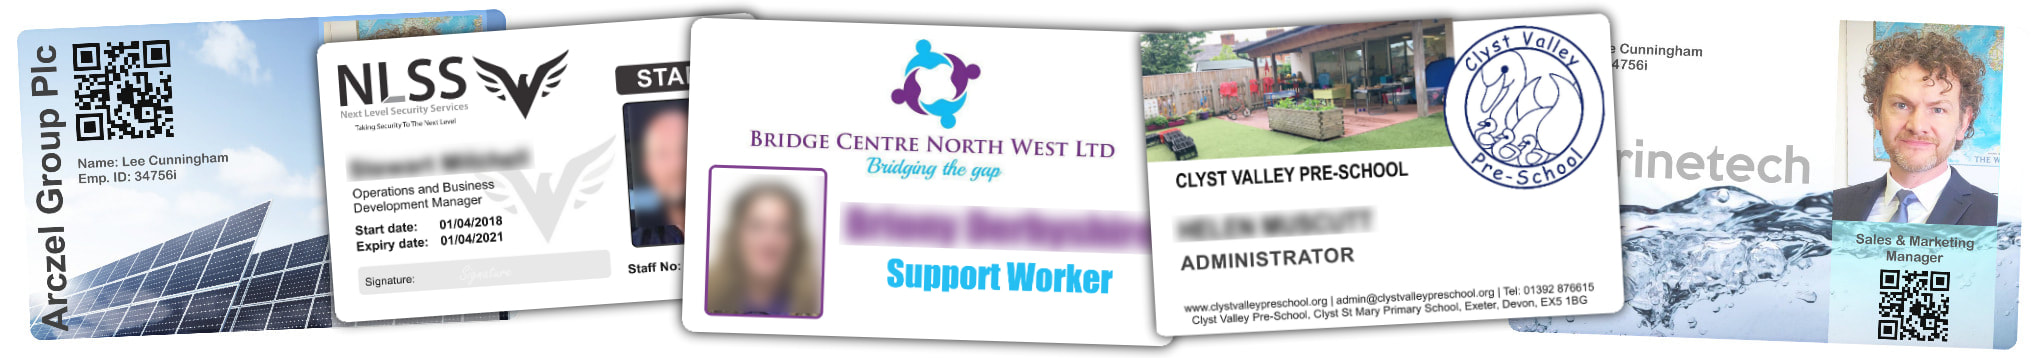 Dudley examples of staff photo ID cards | samples of employee Identity card printing | Workers ID cards printed in 